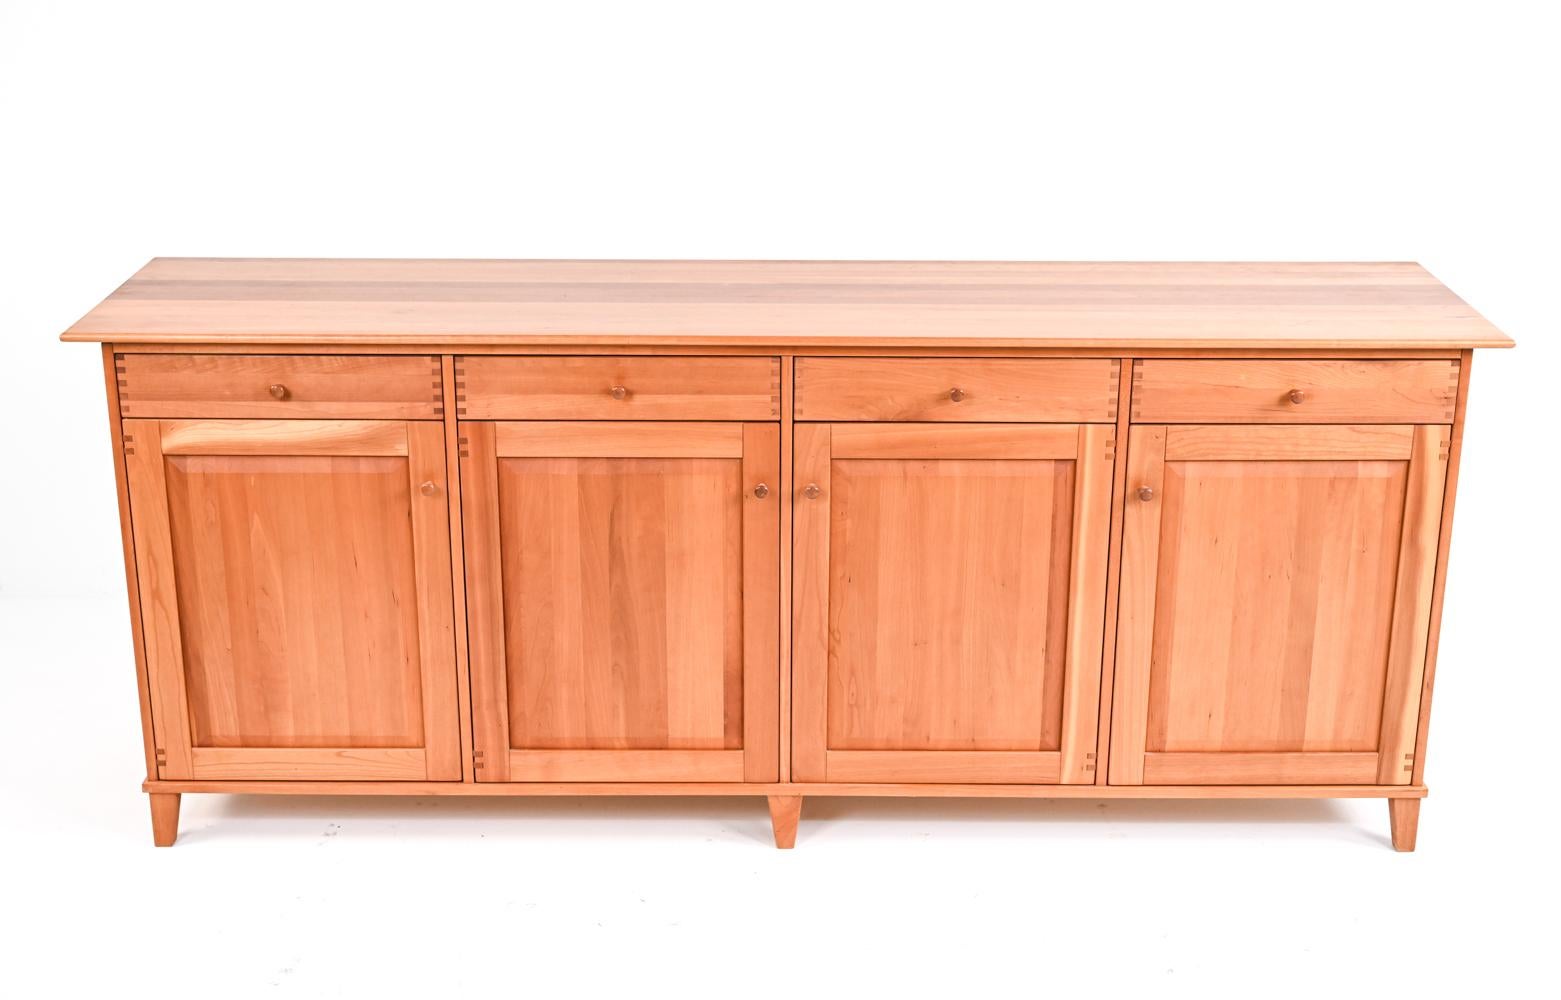 Danish ingenuity and the finest craftsmanship meet in this spectacular sideboard made from solid cherry wood, with four drawers and four shelved cupboards, the cupboard doors crafted with unusual wood hinges to match the finger joinery of the